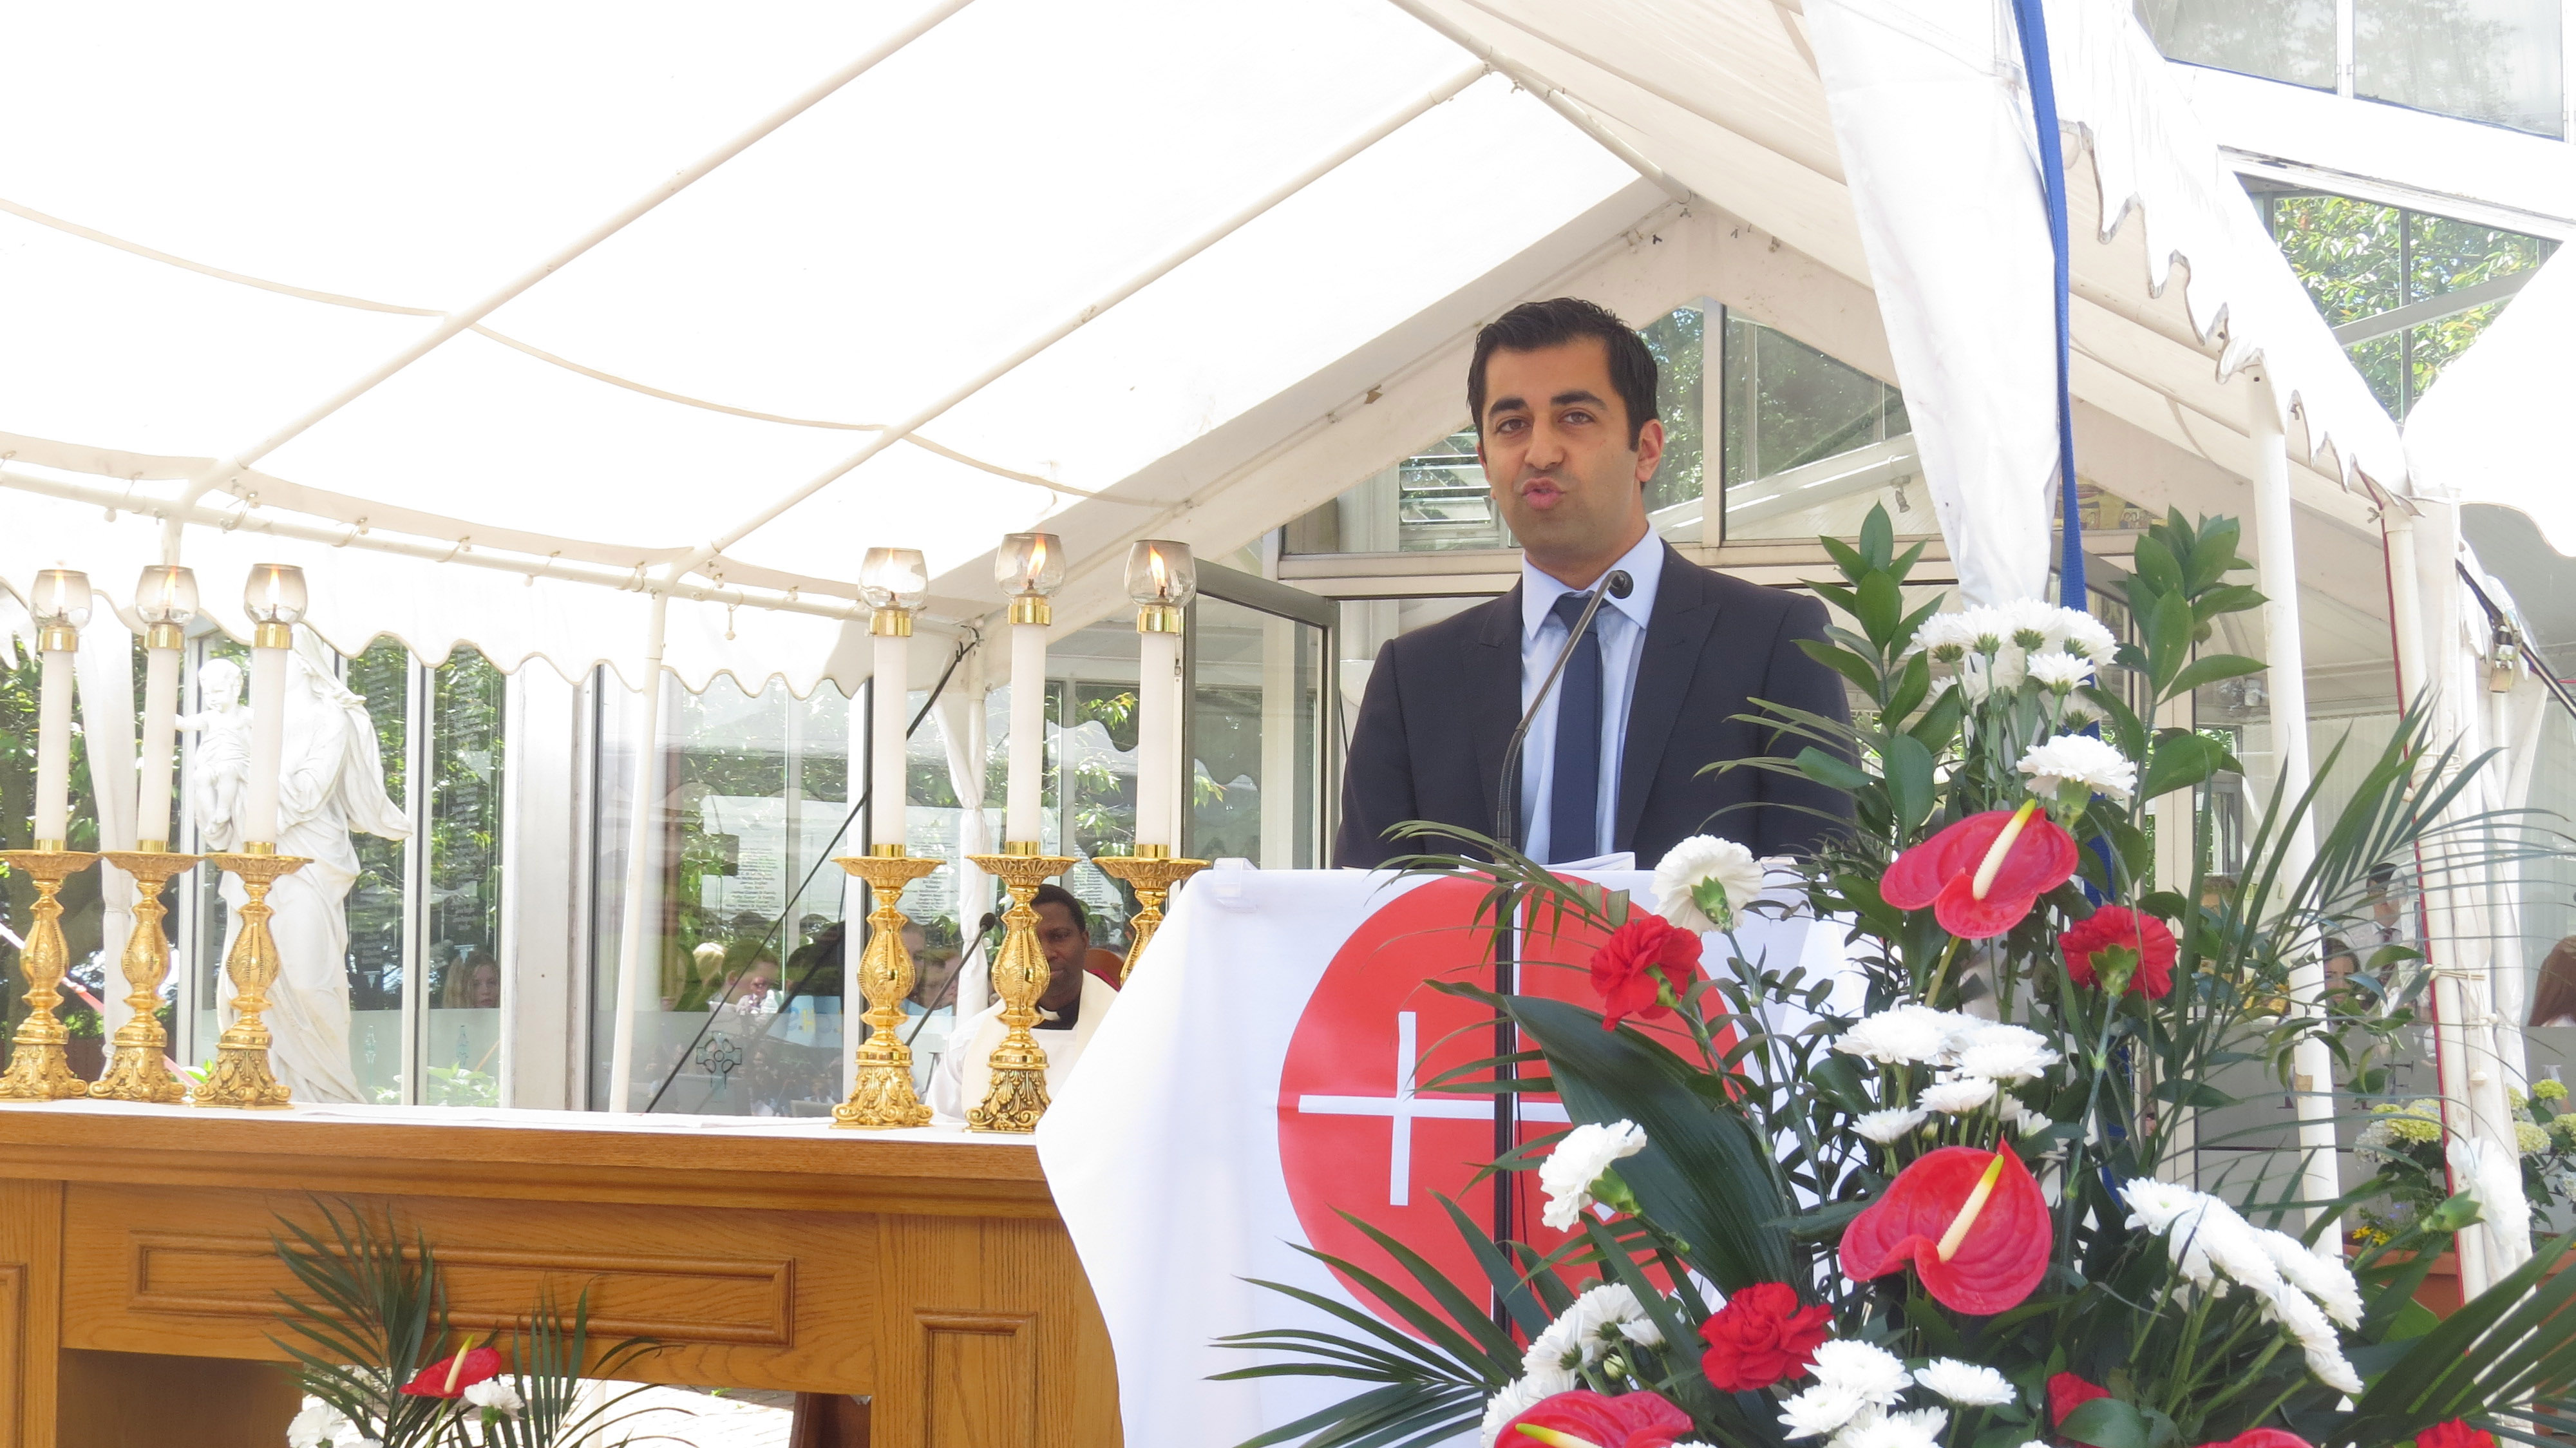 Humza Yousaf, MSP speaking at ACN youth rally in Scotland (© Aid to the Church in Need)